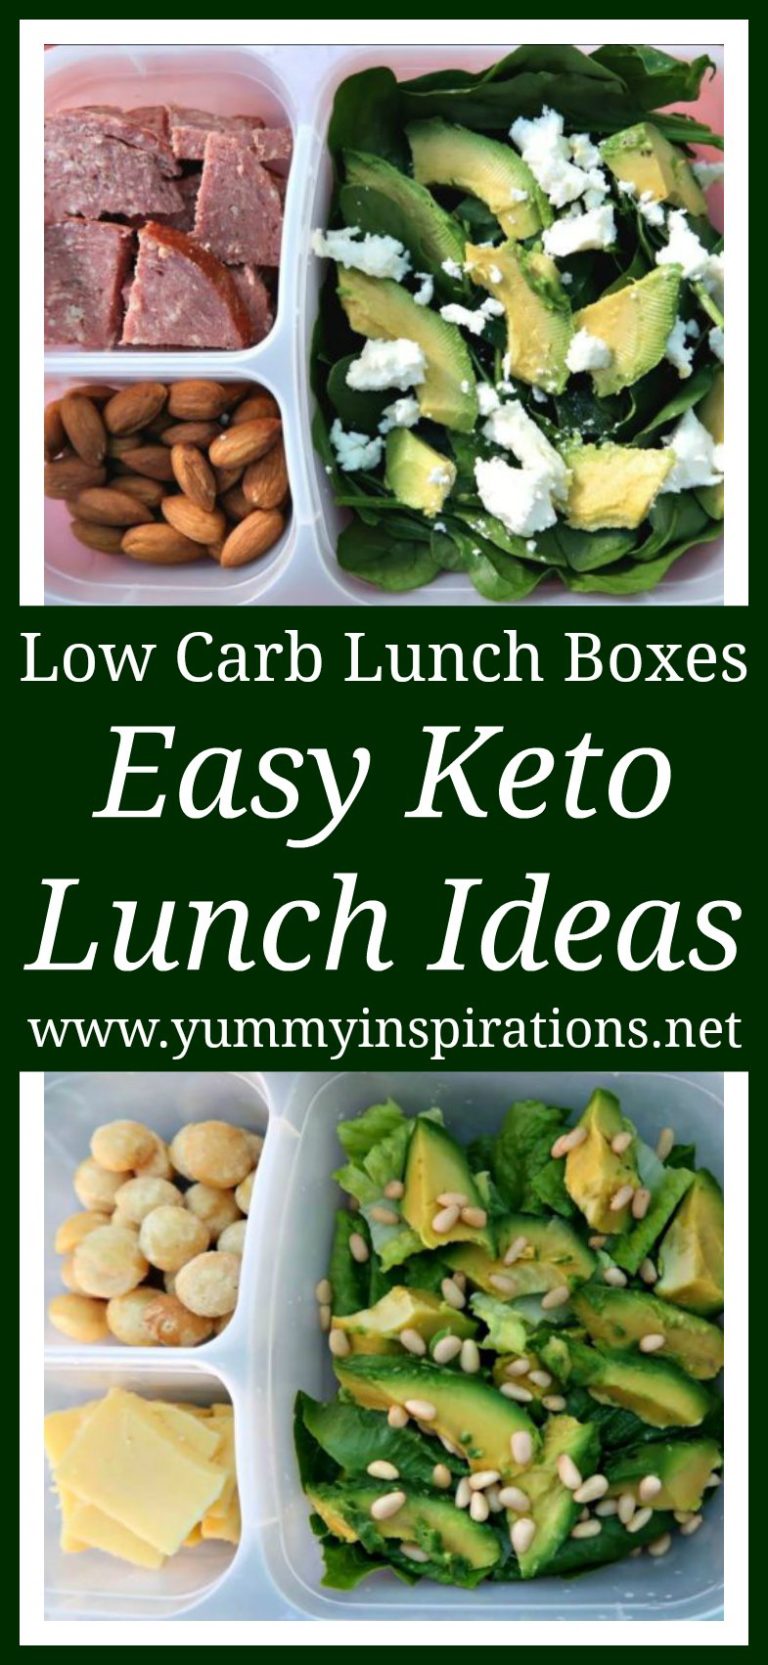 How To Make Yummy Keto Lunch Ideas For Work The Healthy Cake Recipes 9168